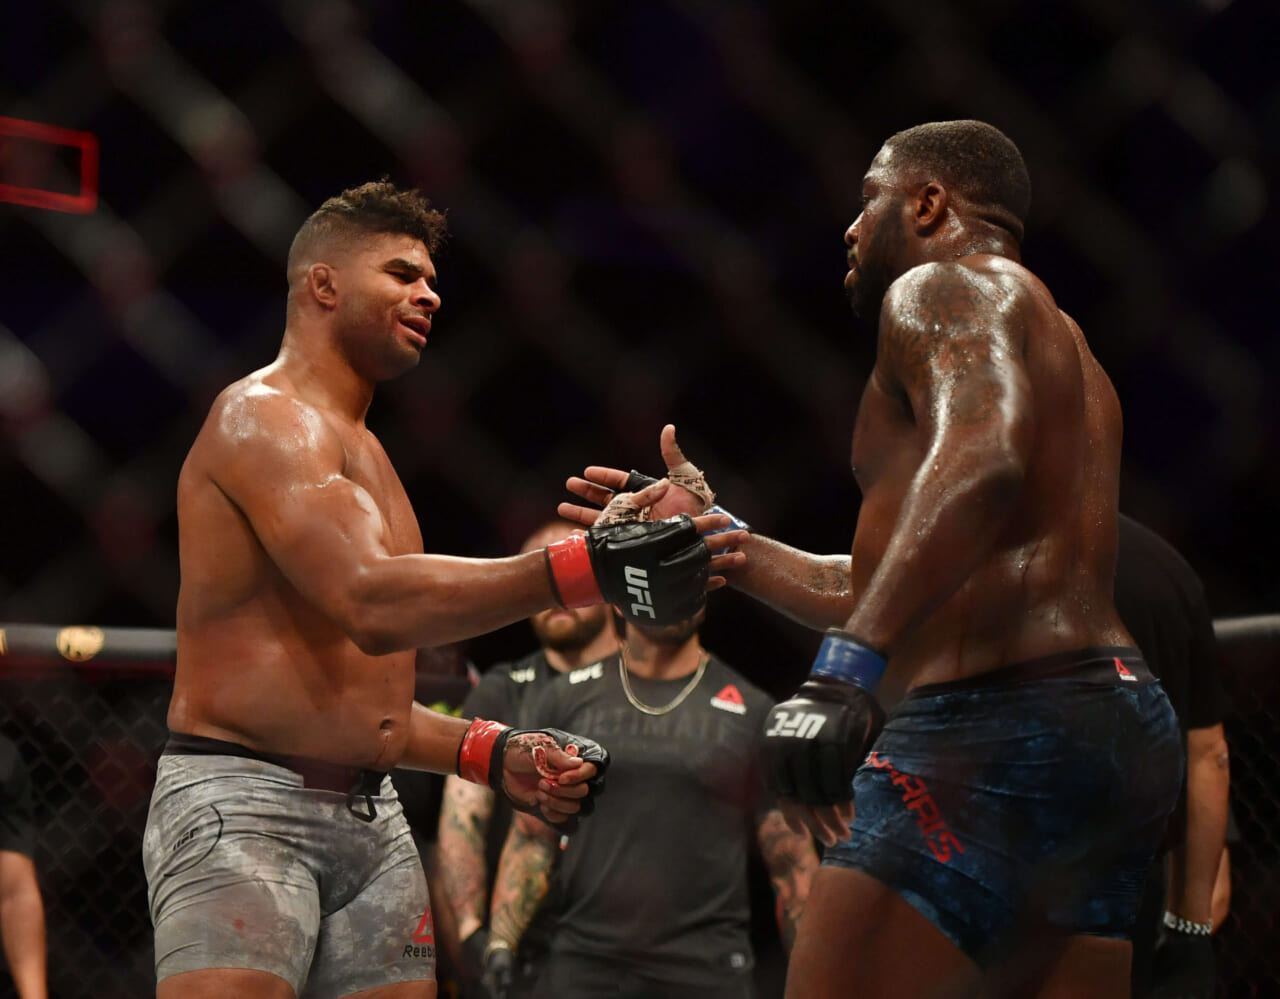 UFC Vegas 9 Preview: Will Alistair Overeem or Augusto Sakai take a step forward in the heavyweight division